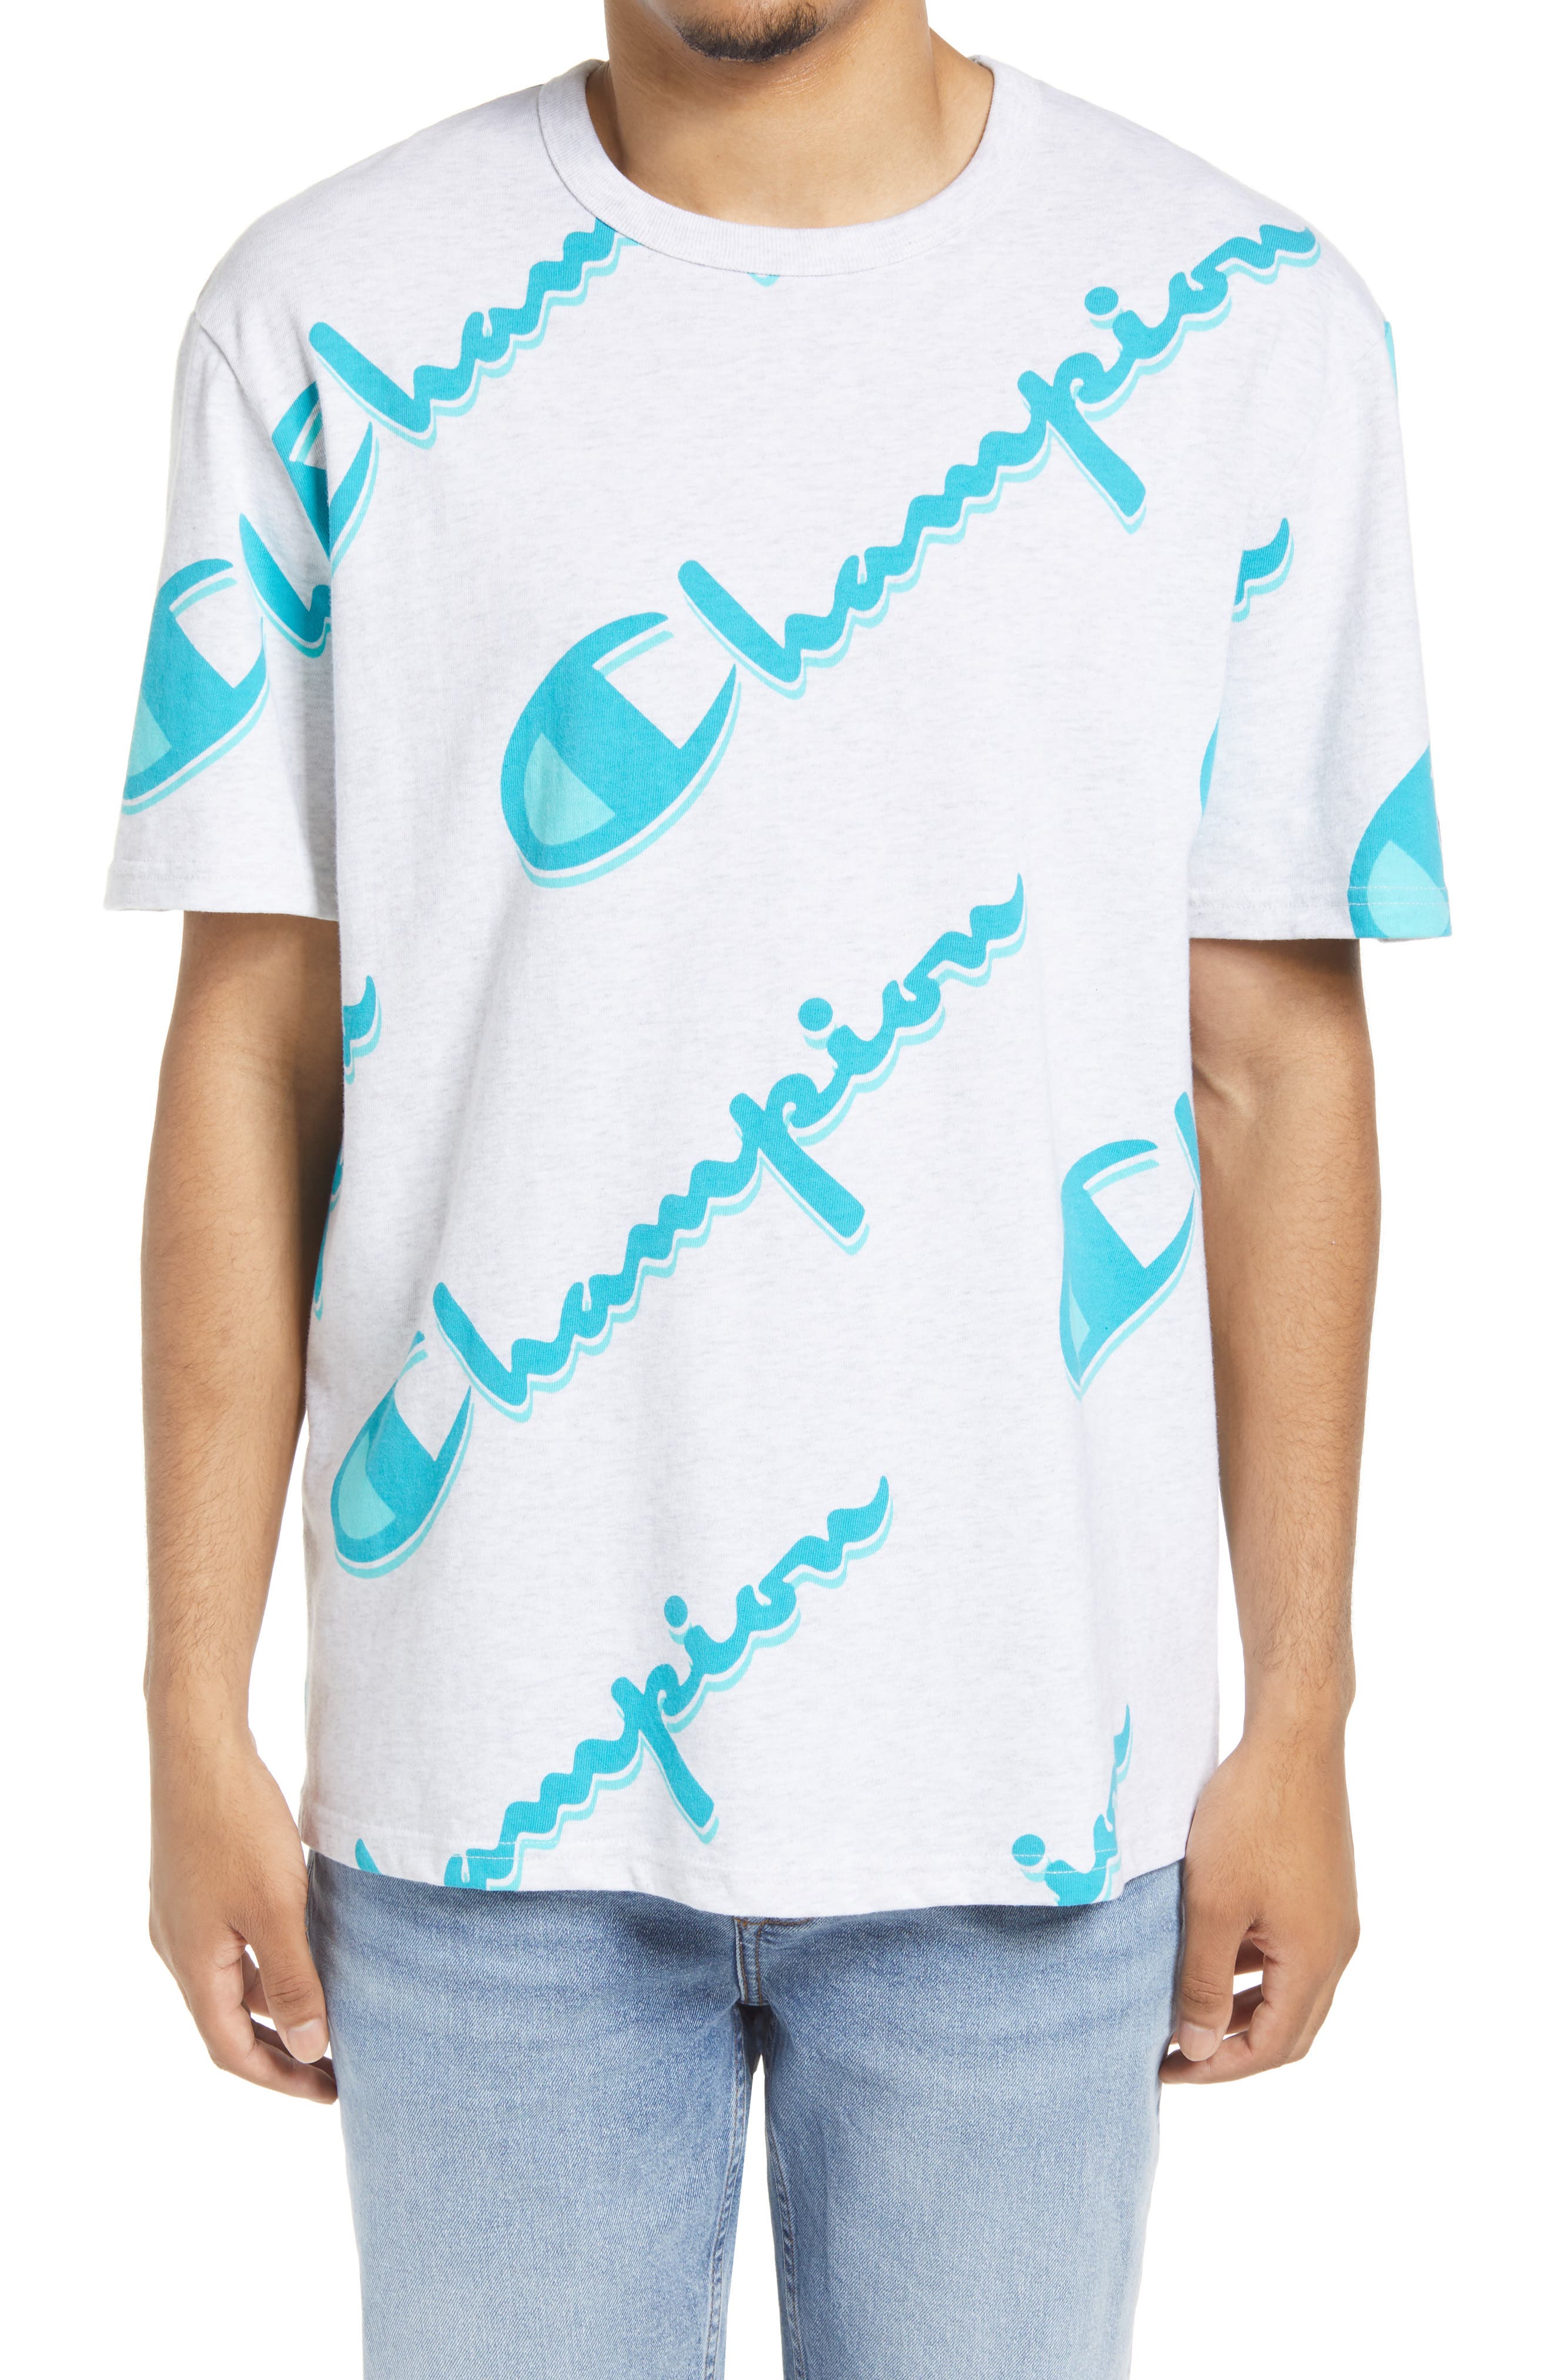 white champion shirt with blue letters